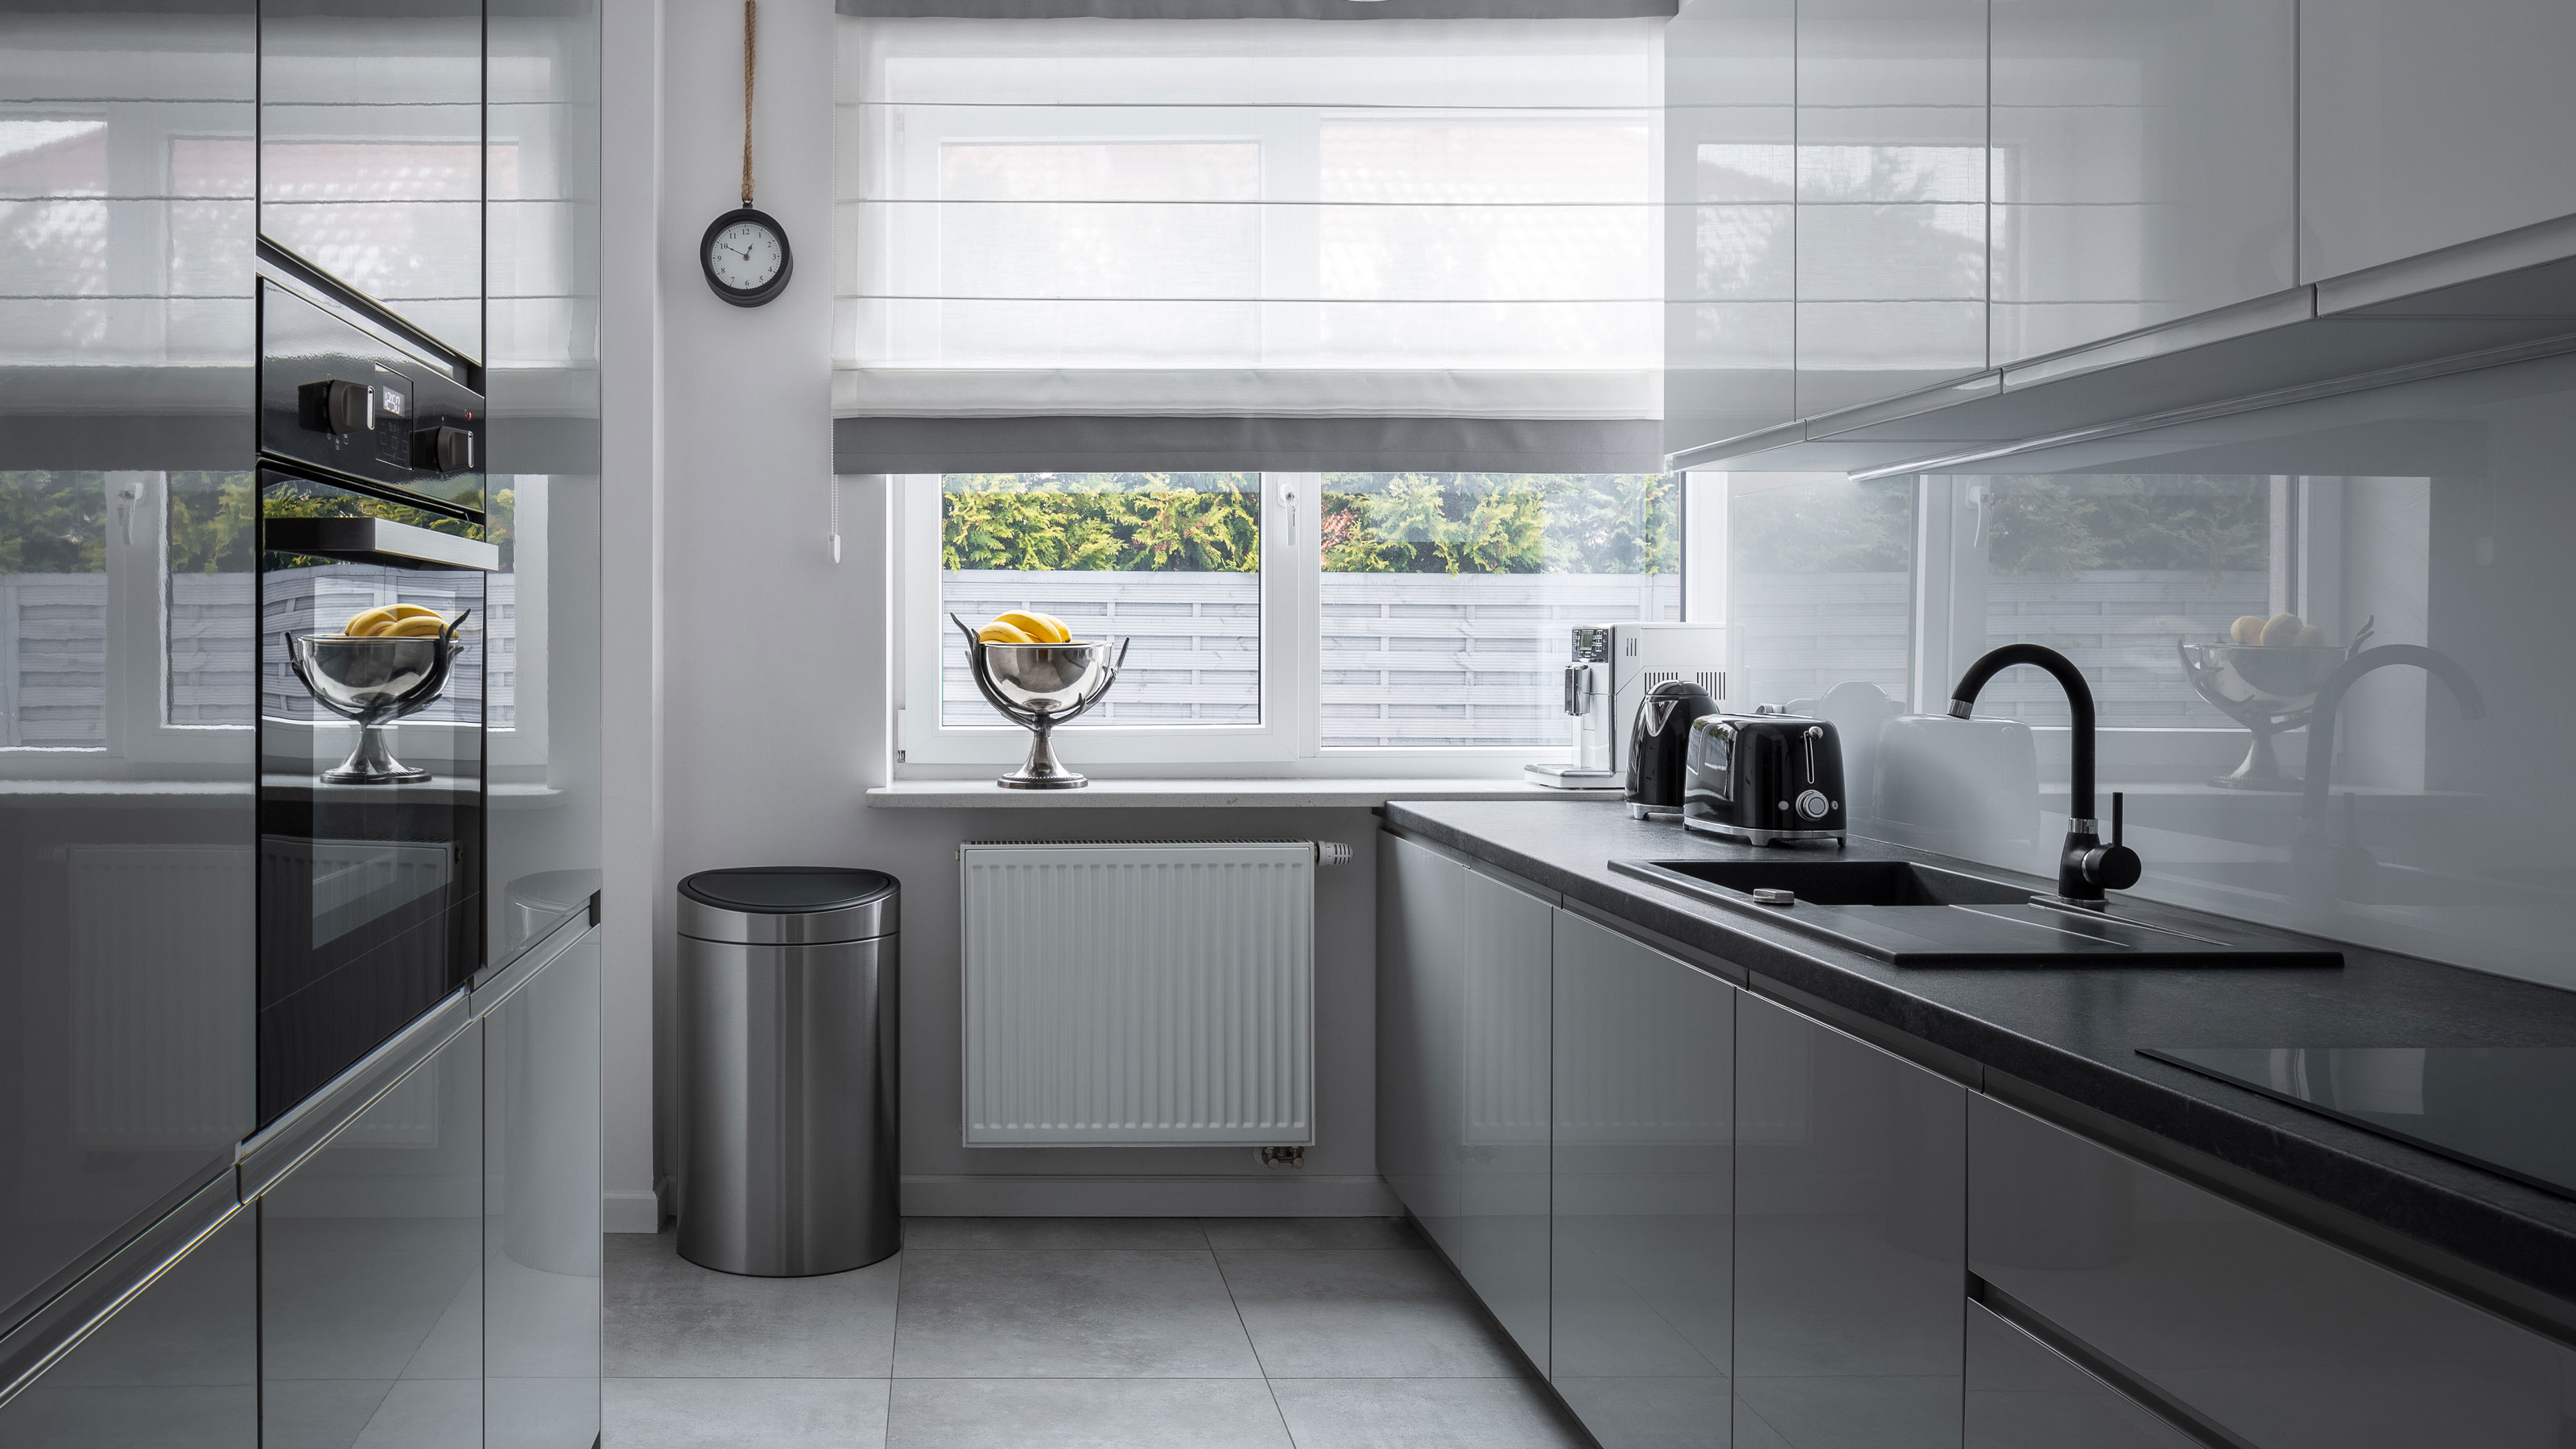 Dealing with Trash Cans in Small Kitchens - Trash Cans Unlimited